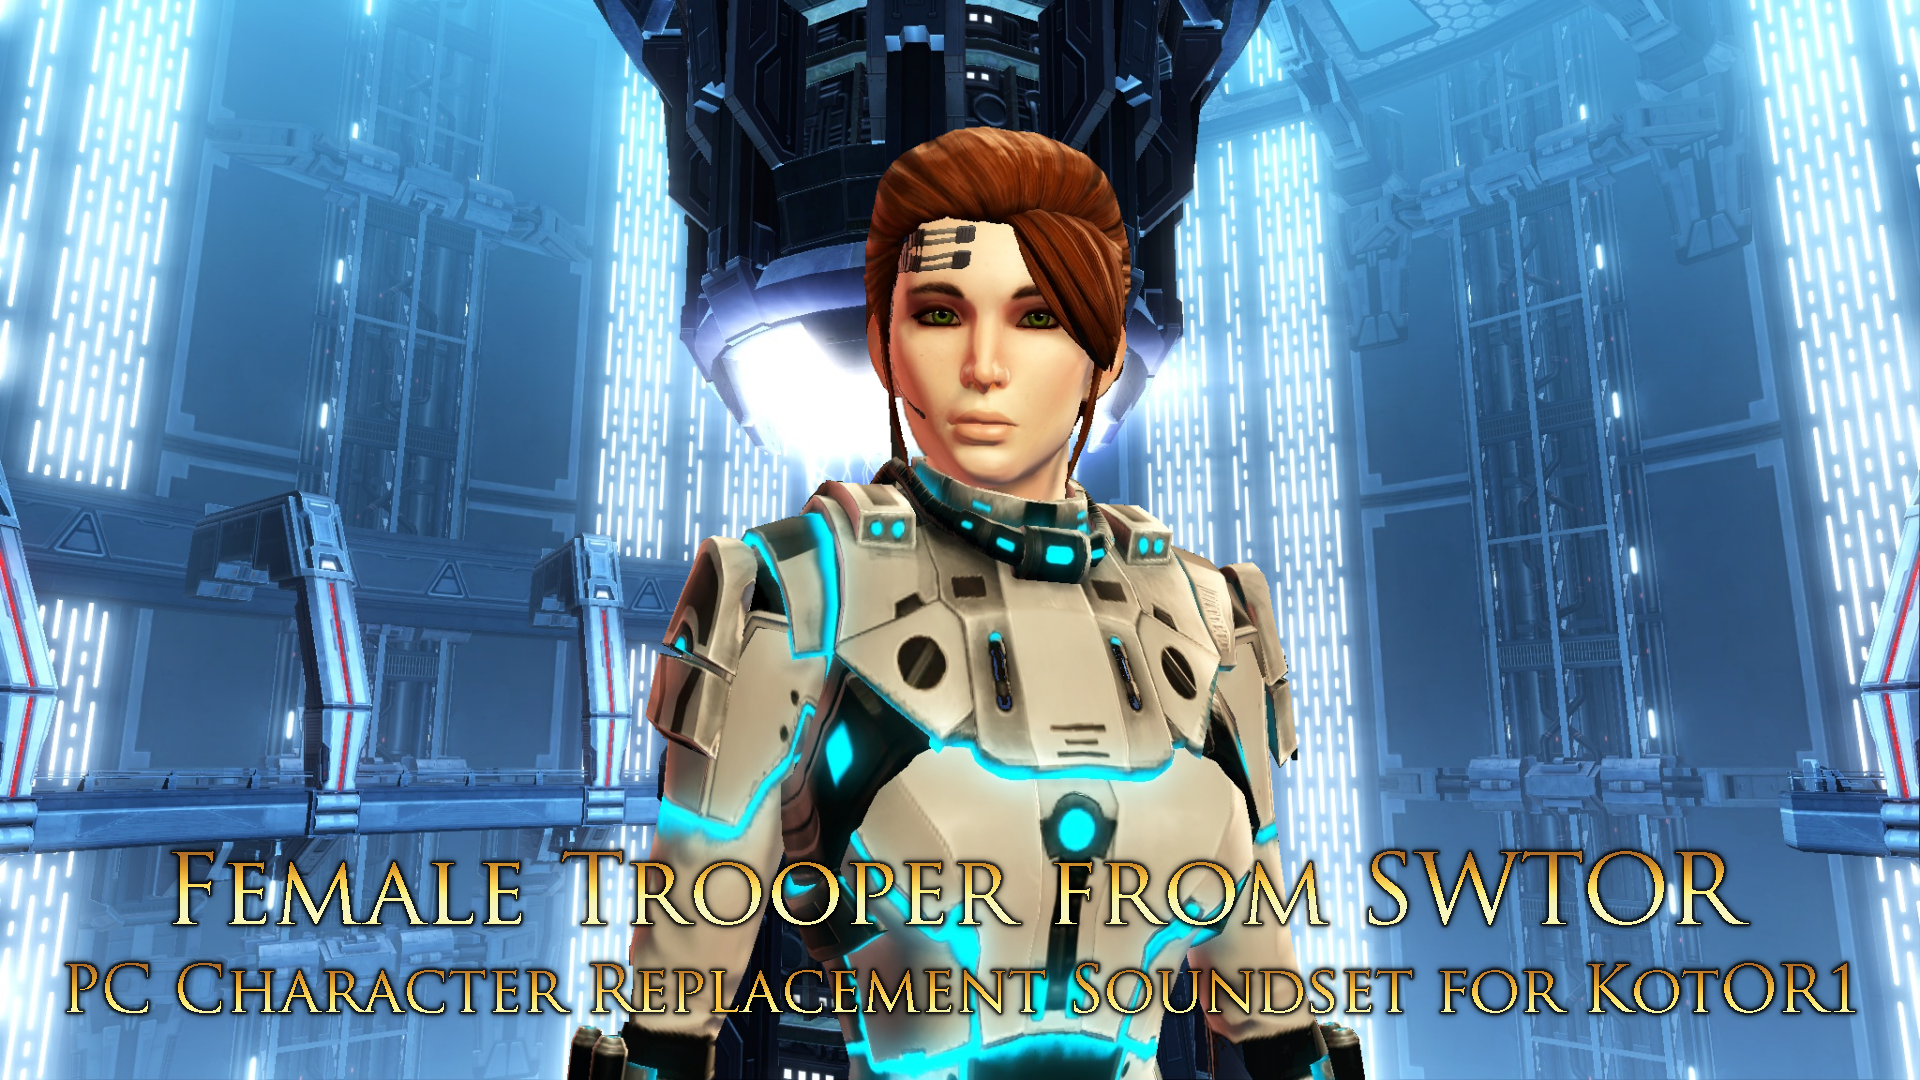 [K1] SWTOR Female Trooper - PC Replacement Soundset